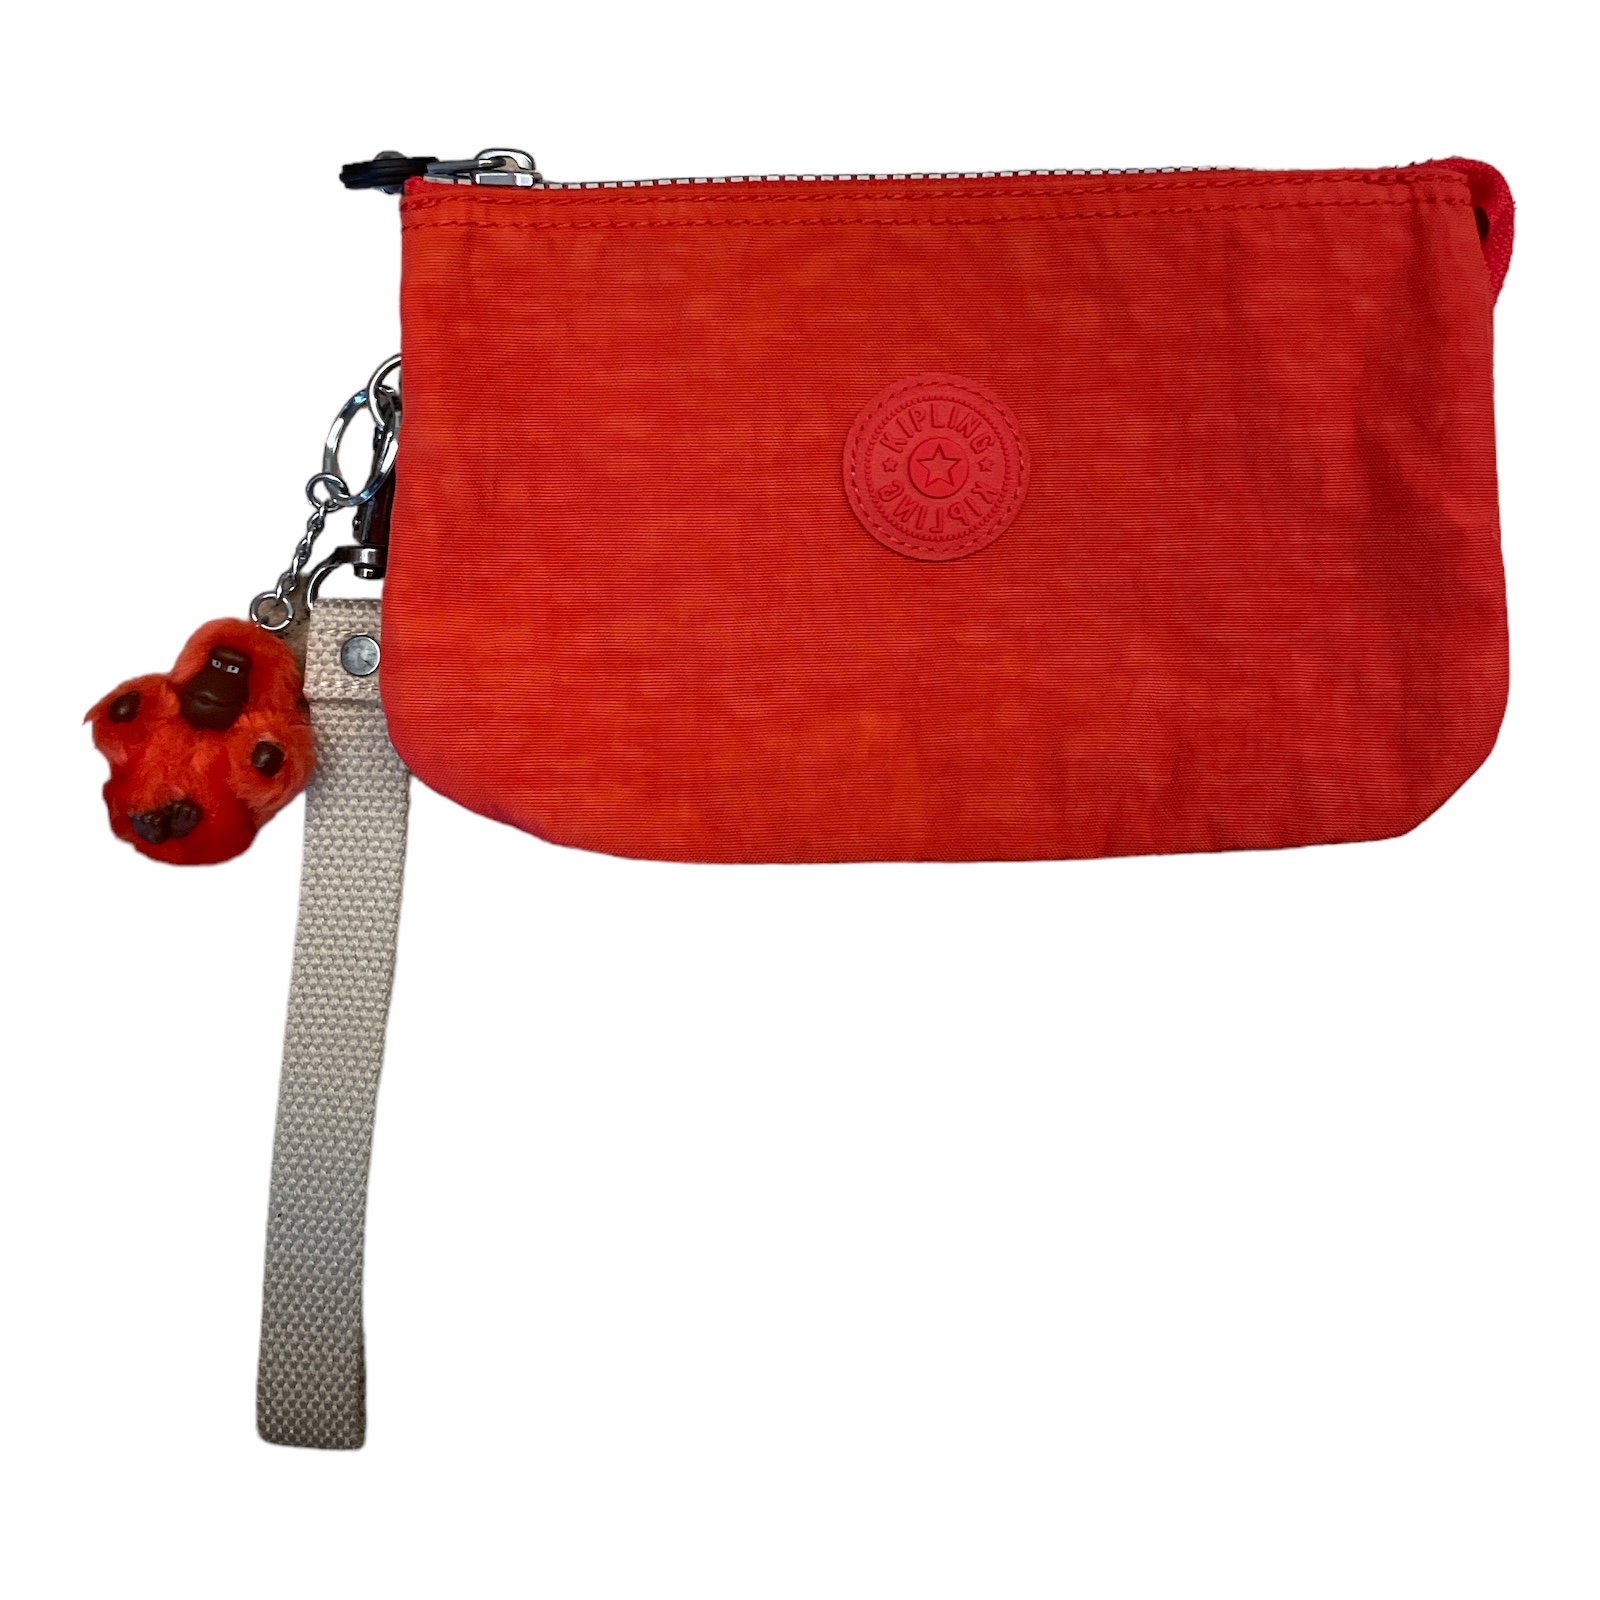 Kipling_Salmon_Creativity_Large_Pouch_Front